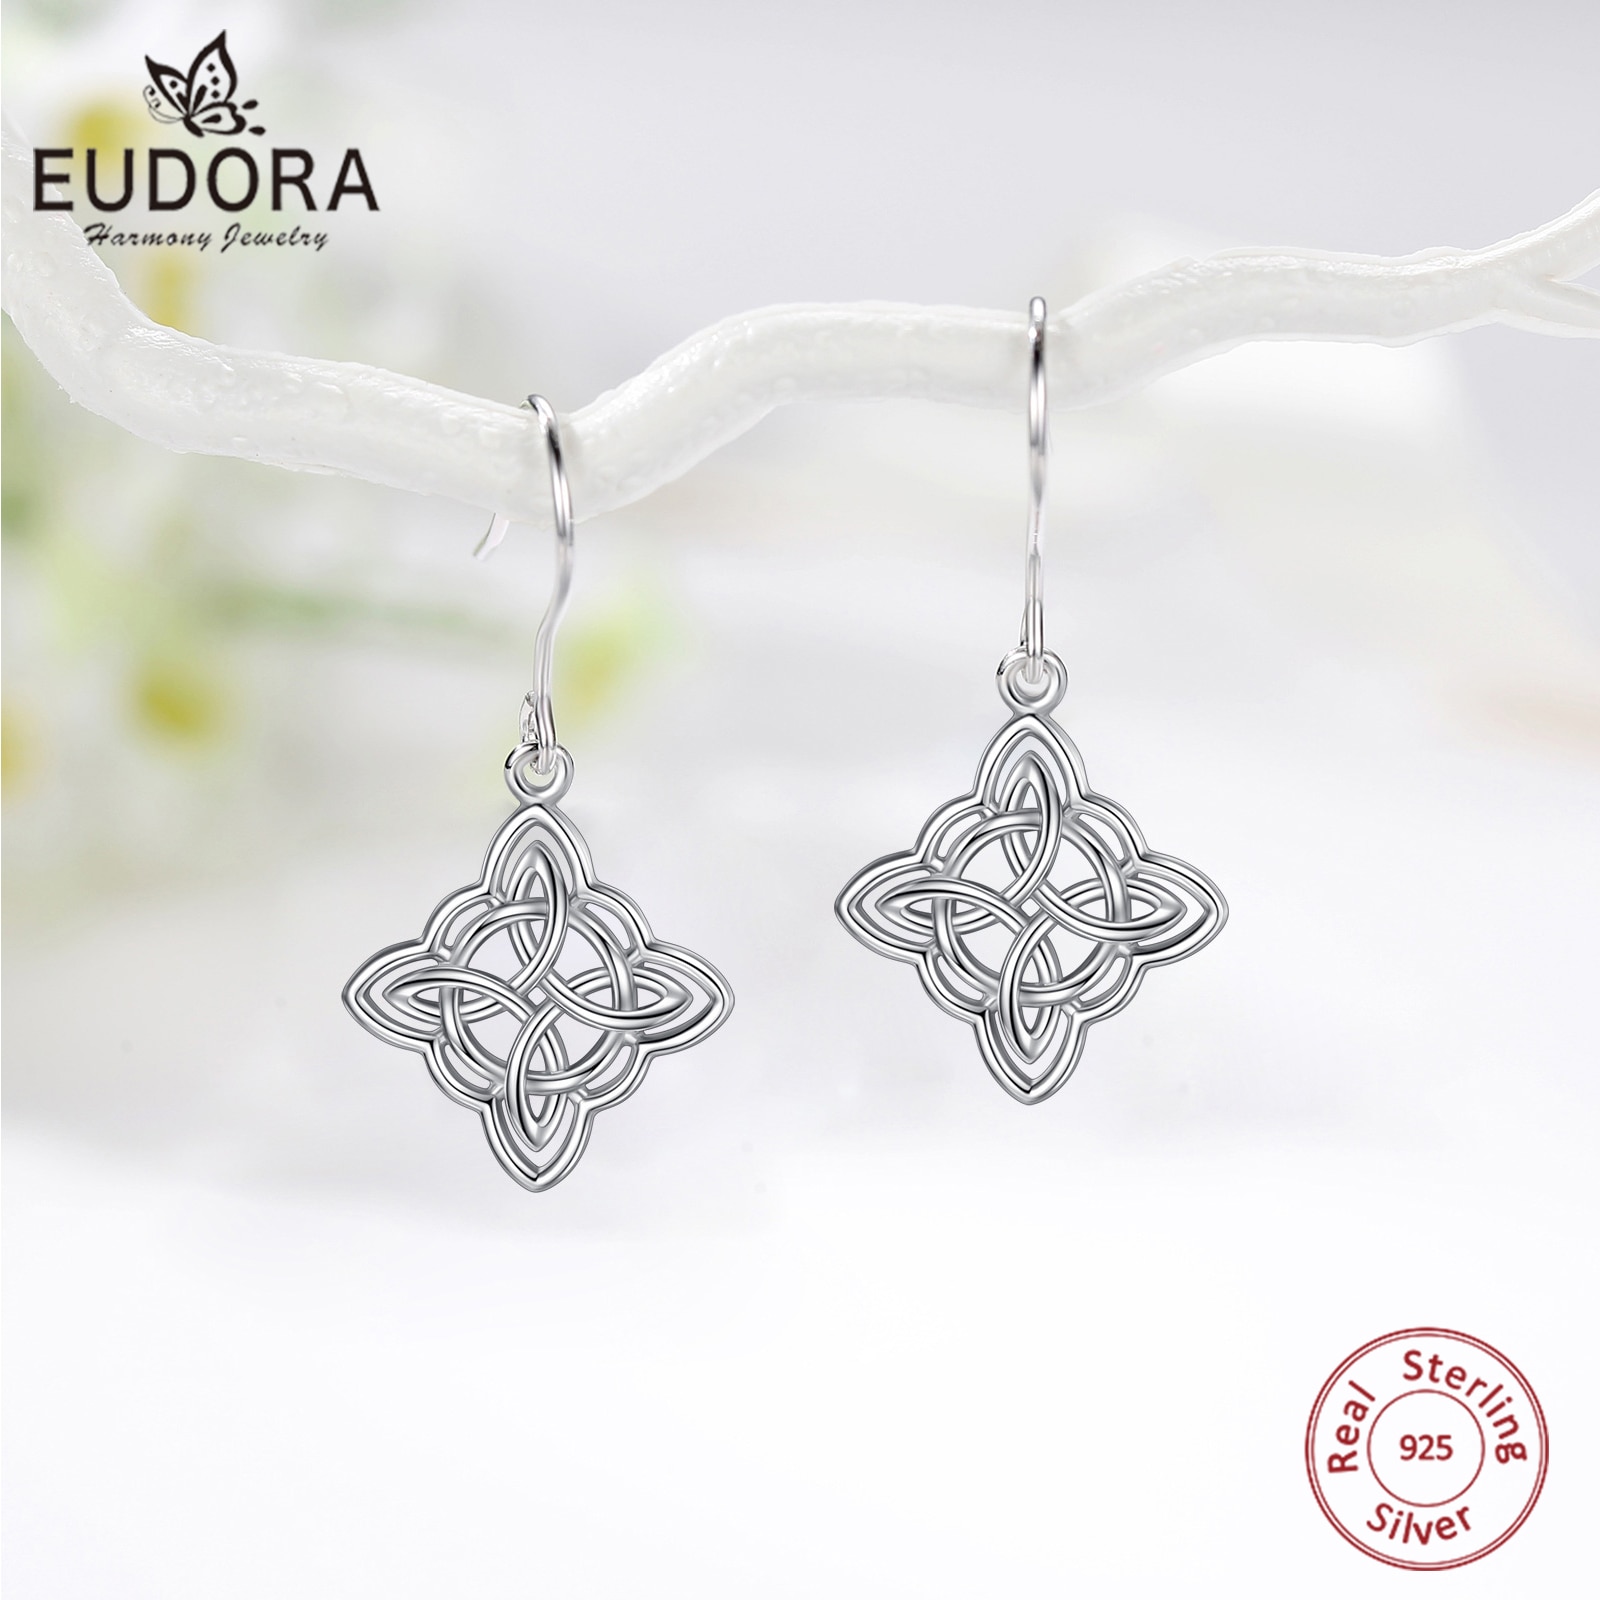 Eudora 925 Sterling Silver Witch Knot Earrings for Women Wicca Irish Celtic Knot Drop Earing Witchcraft Charm Jewelry Party Gift